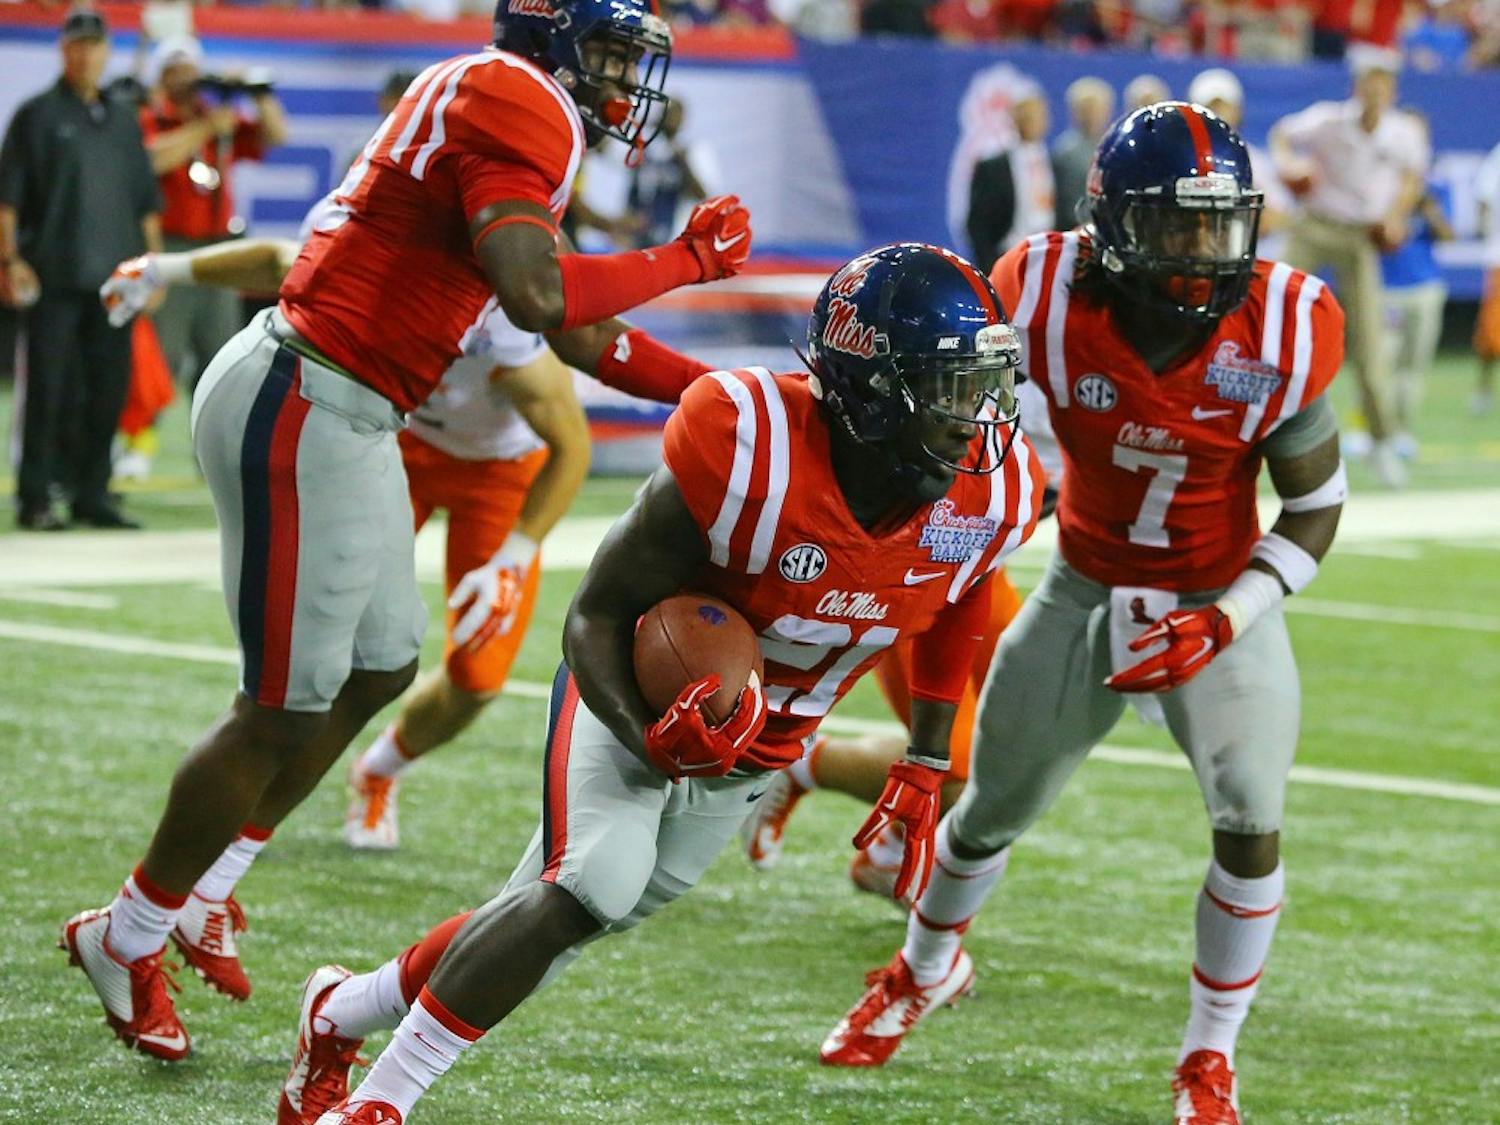 Mississippi defensive back Senquez Golson intercepts Boise State in the end zone during the first quarter at the Georgia Dome in Atlanta on Thursday, Aug. 28, 2014. (Curtis Compton/Atlanta Journal-Constitution/MCT)